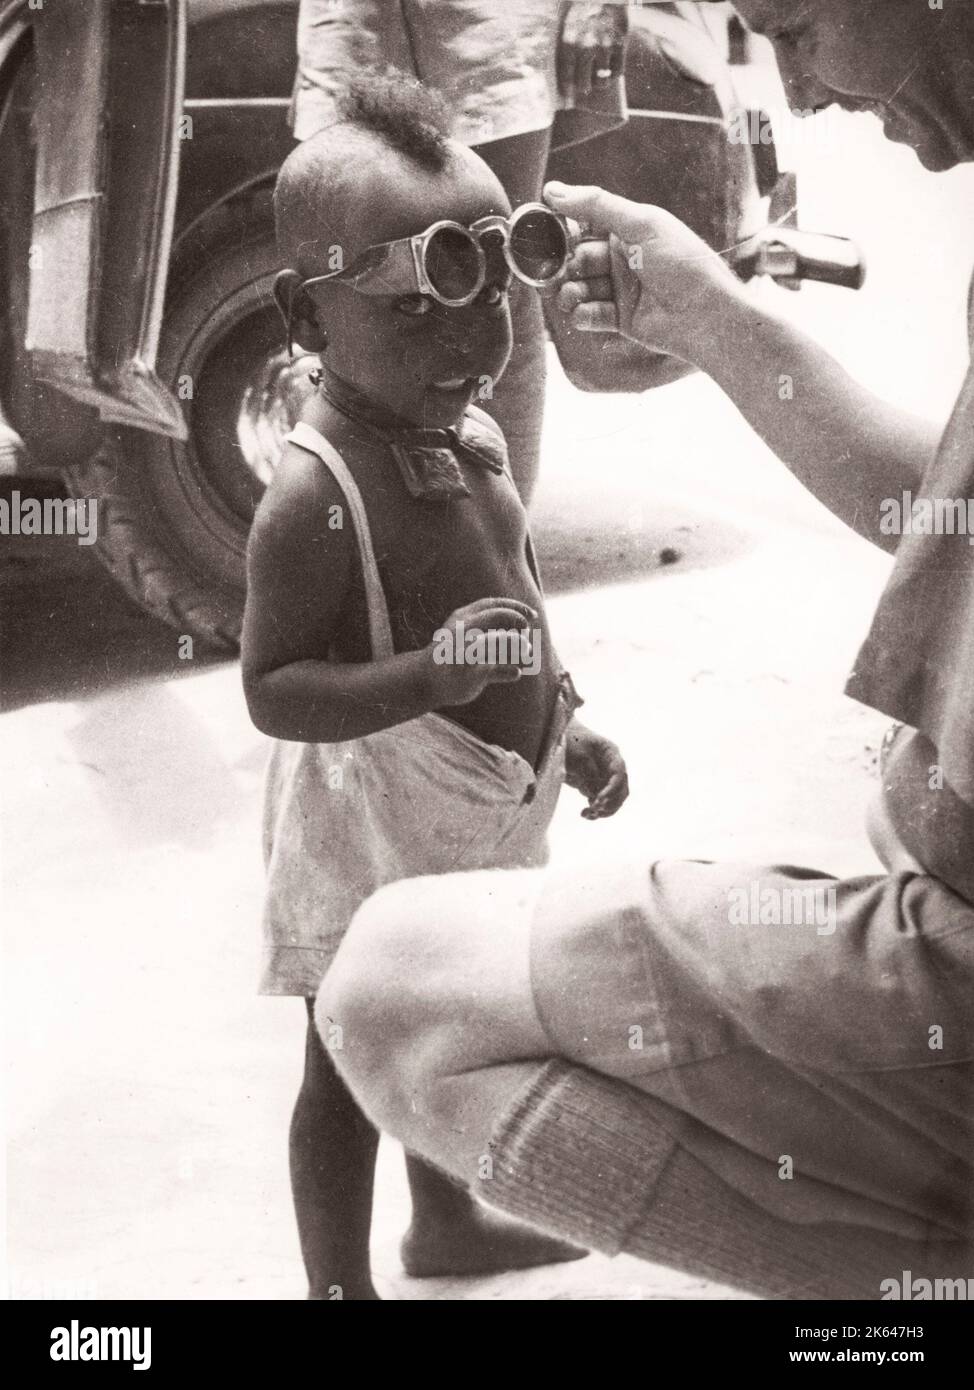 1940s East Africa - young Somali boy with glasses Photograph by a British army recruitment officer stationed in East Africa and the Middle East during World War II Stock Photo